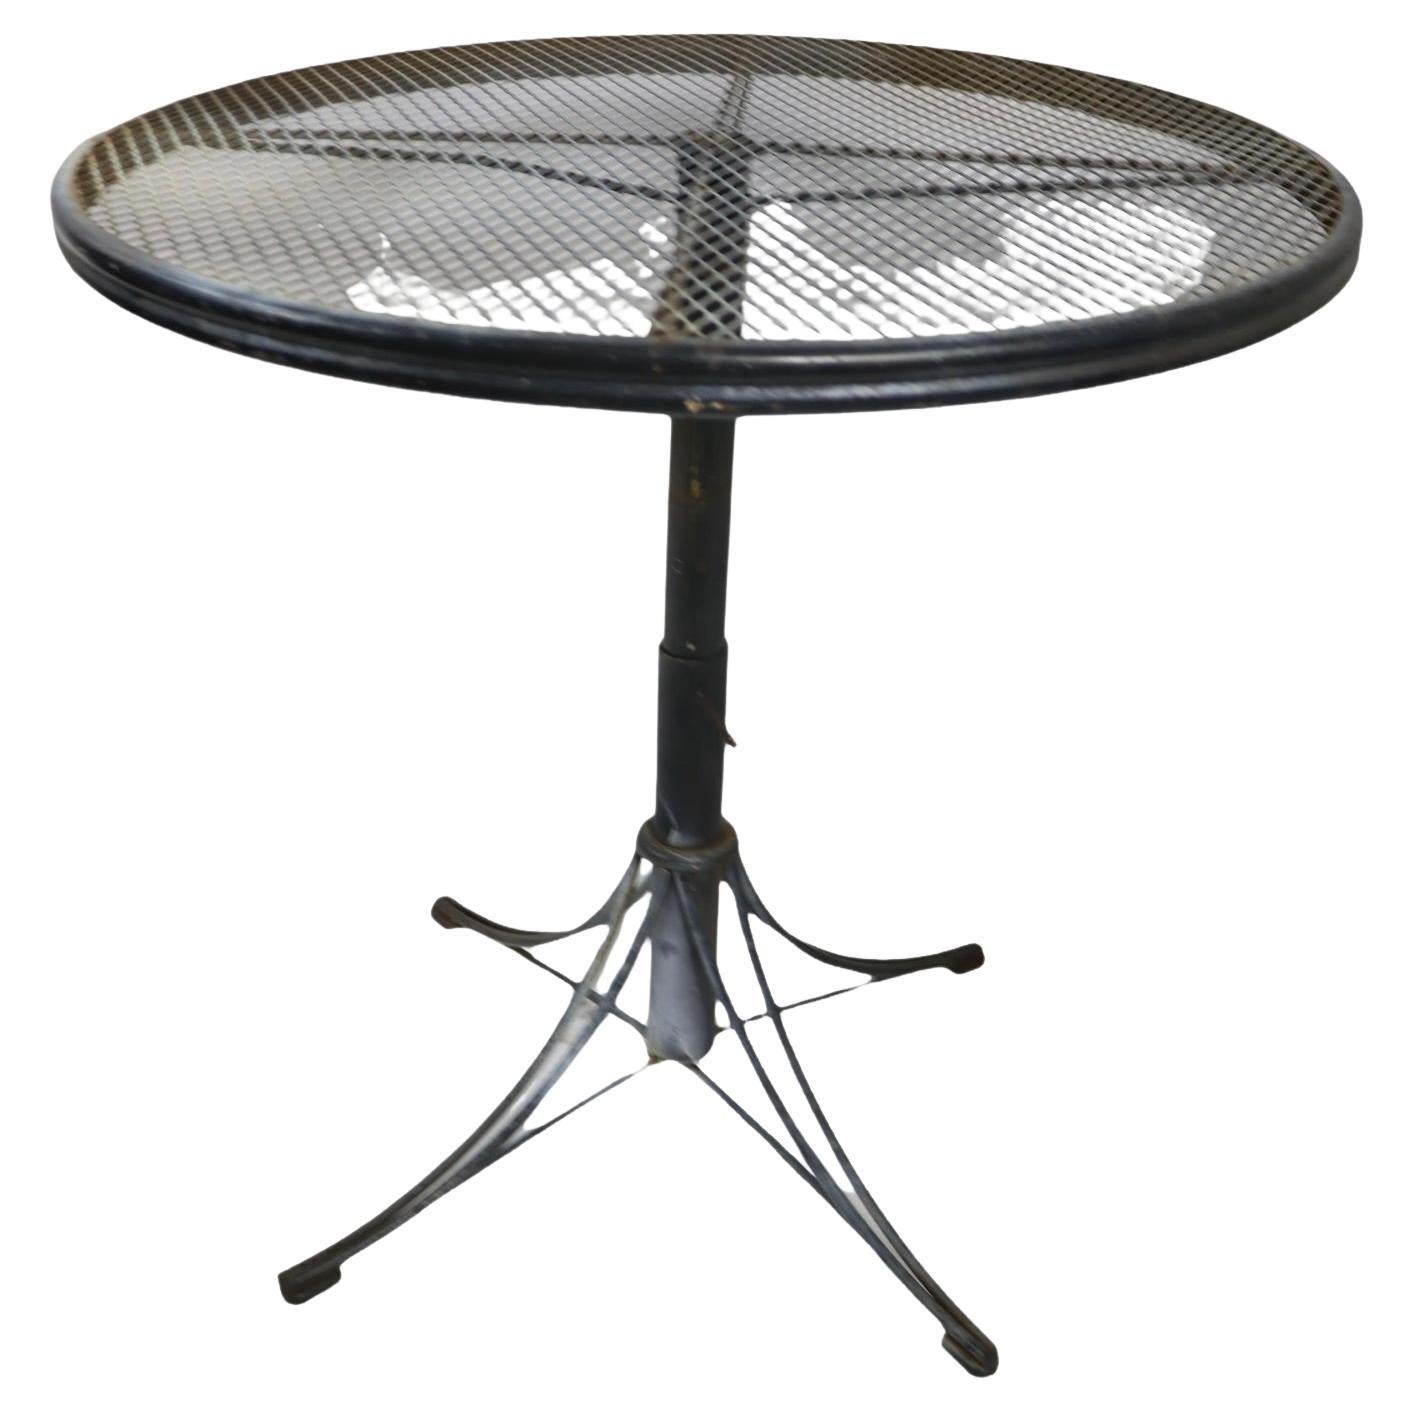 Unusual adjustable table of wrought iro=bn and metal mesh, made by Homecrest , Bottemiller ca. 1960's. This example features an adjustable center pole, allowing the height to extend from a coffee table height ( 17